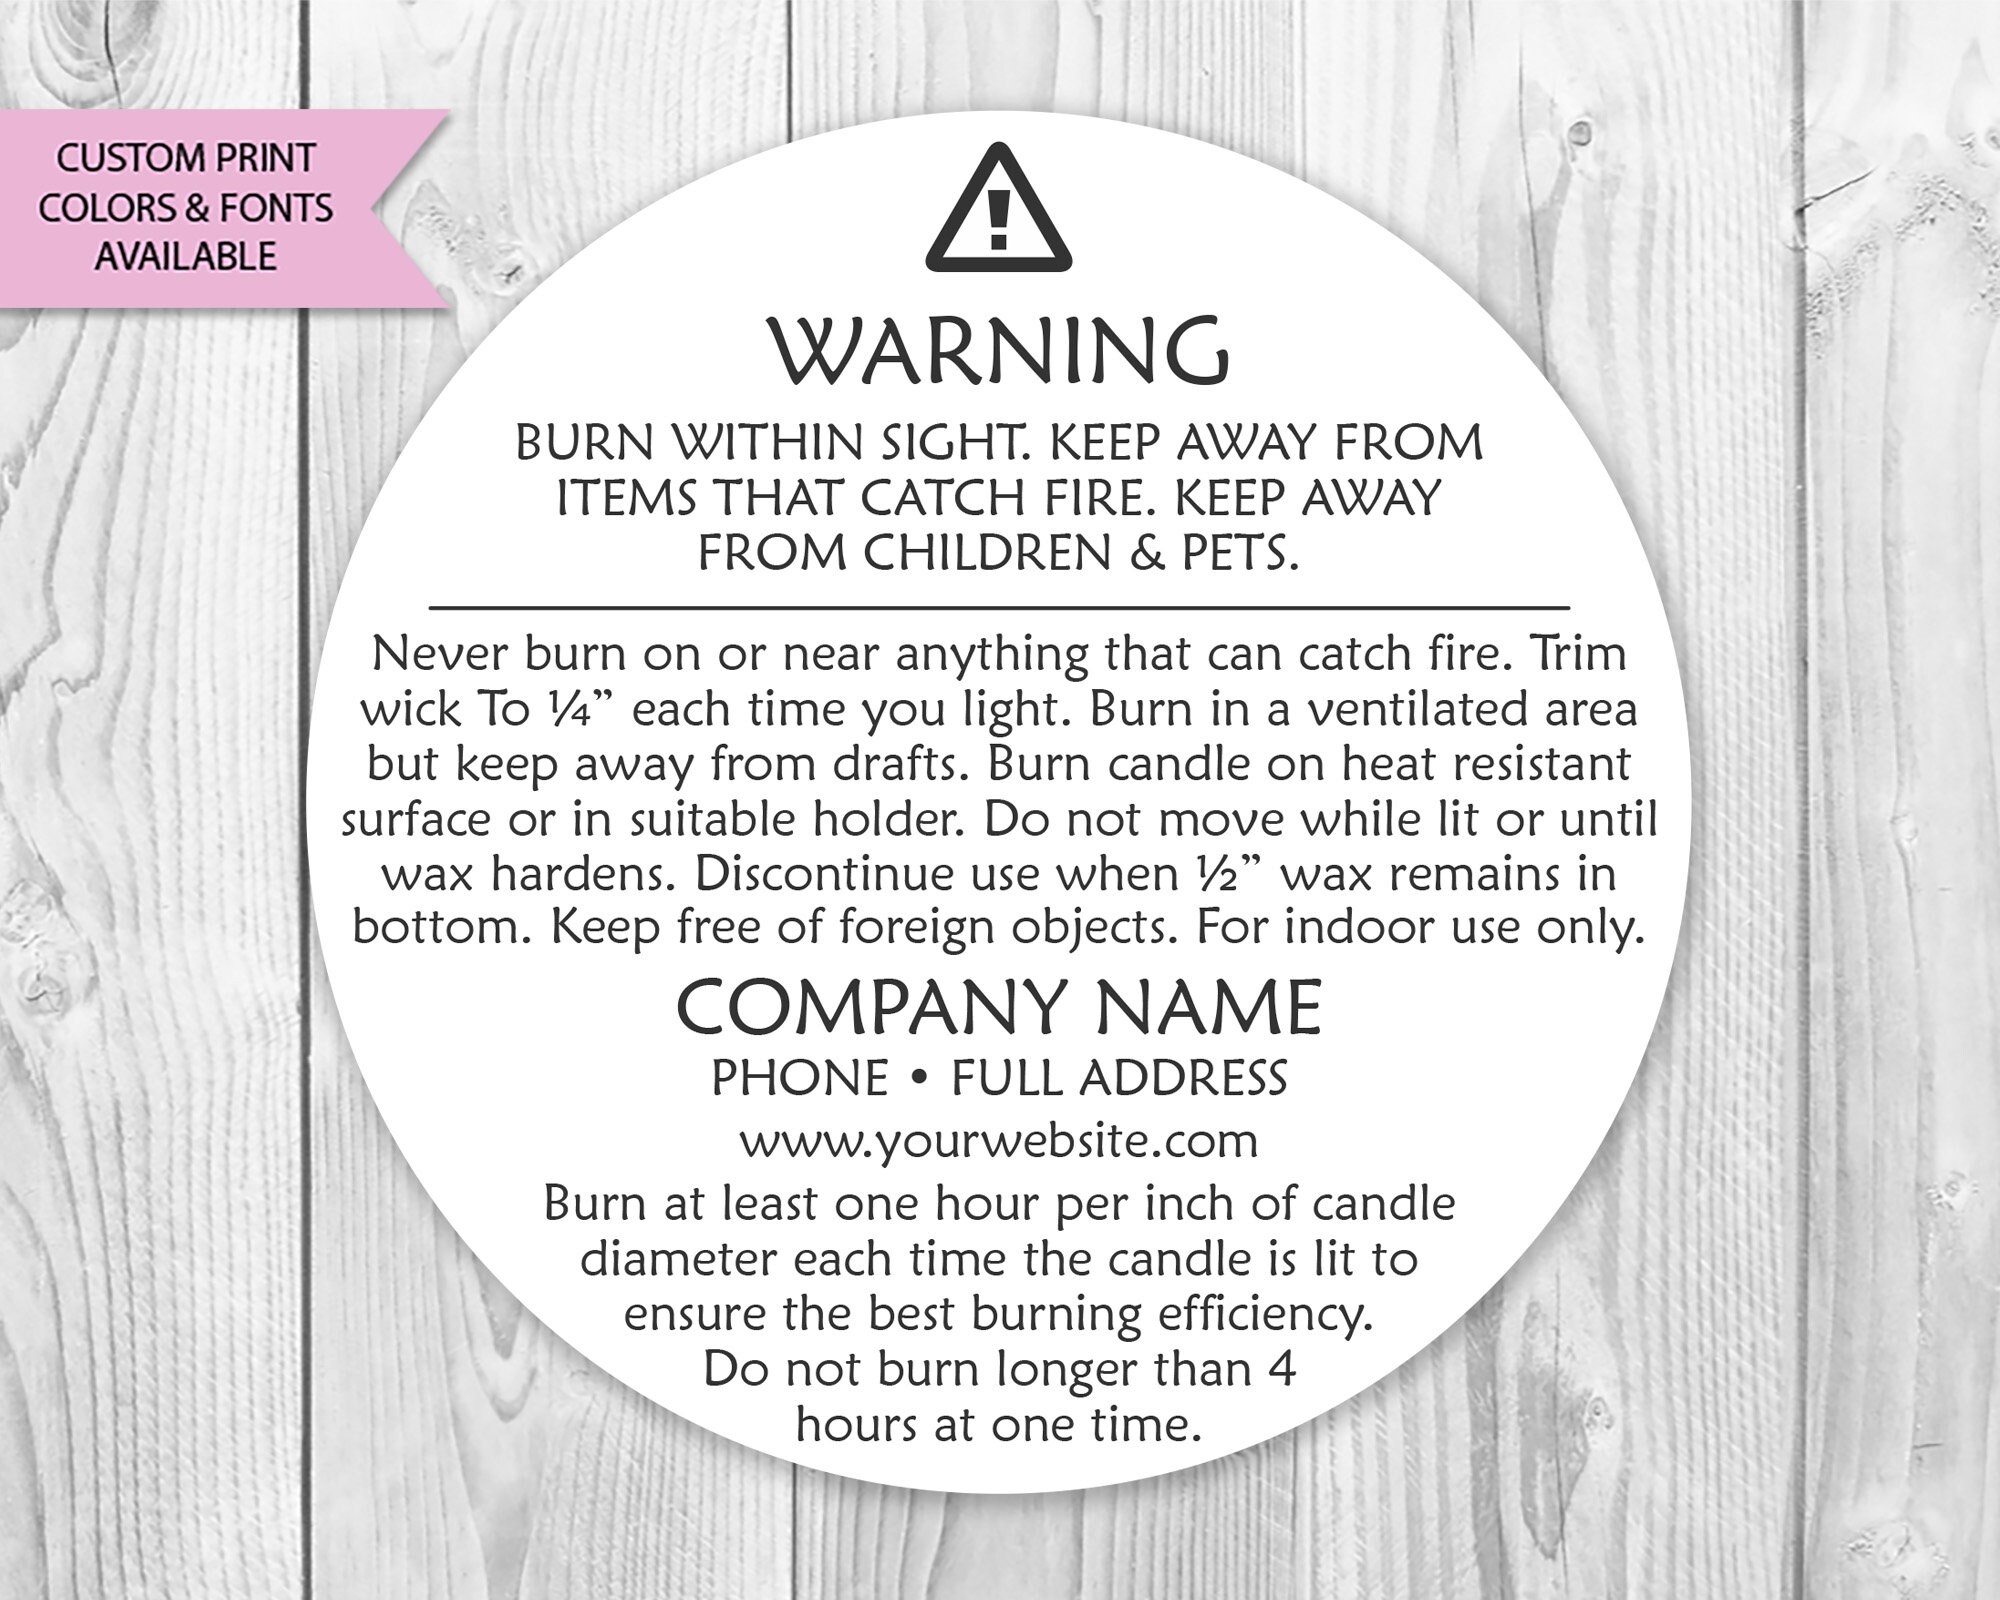 Candle Warning Labels (100 Count)